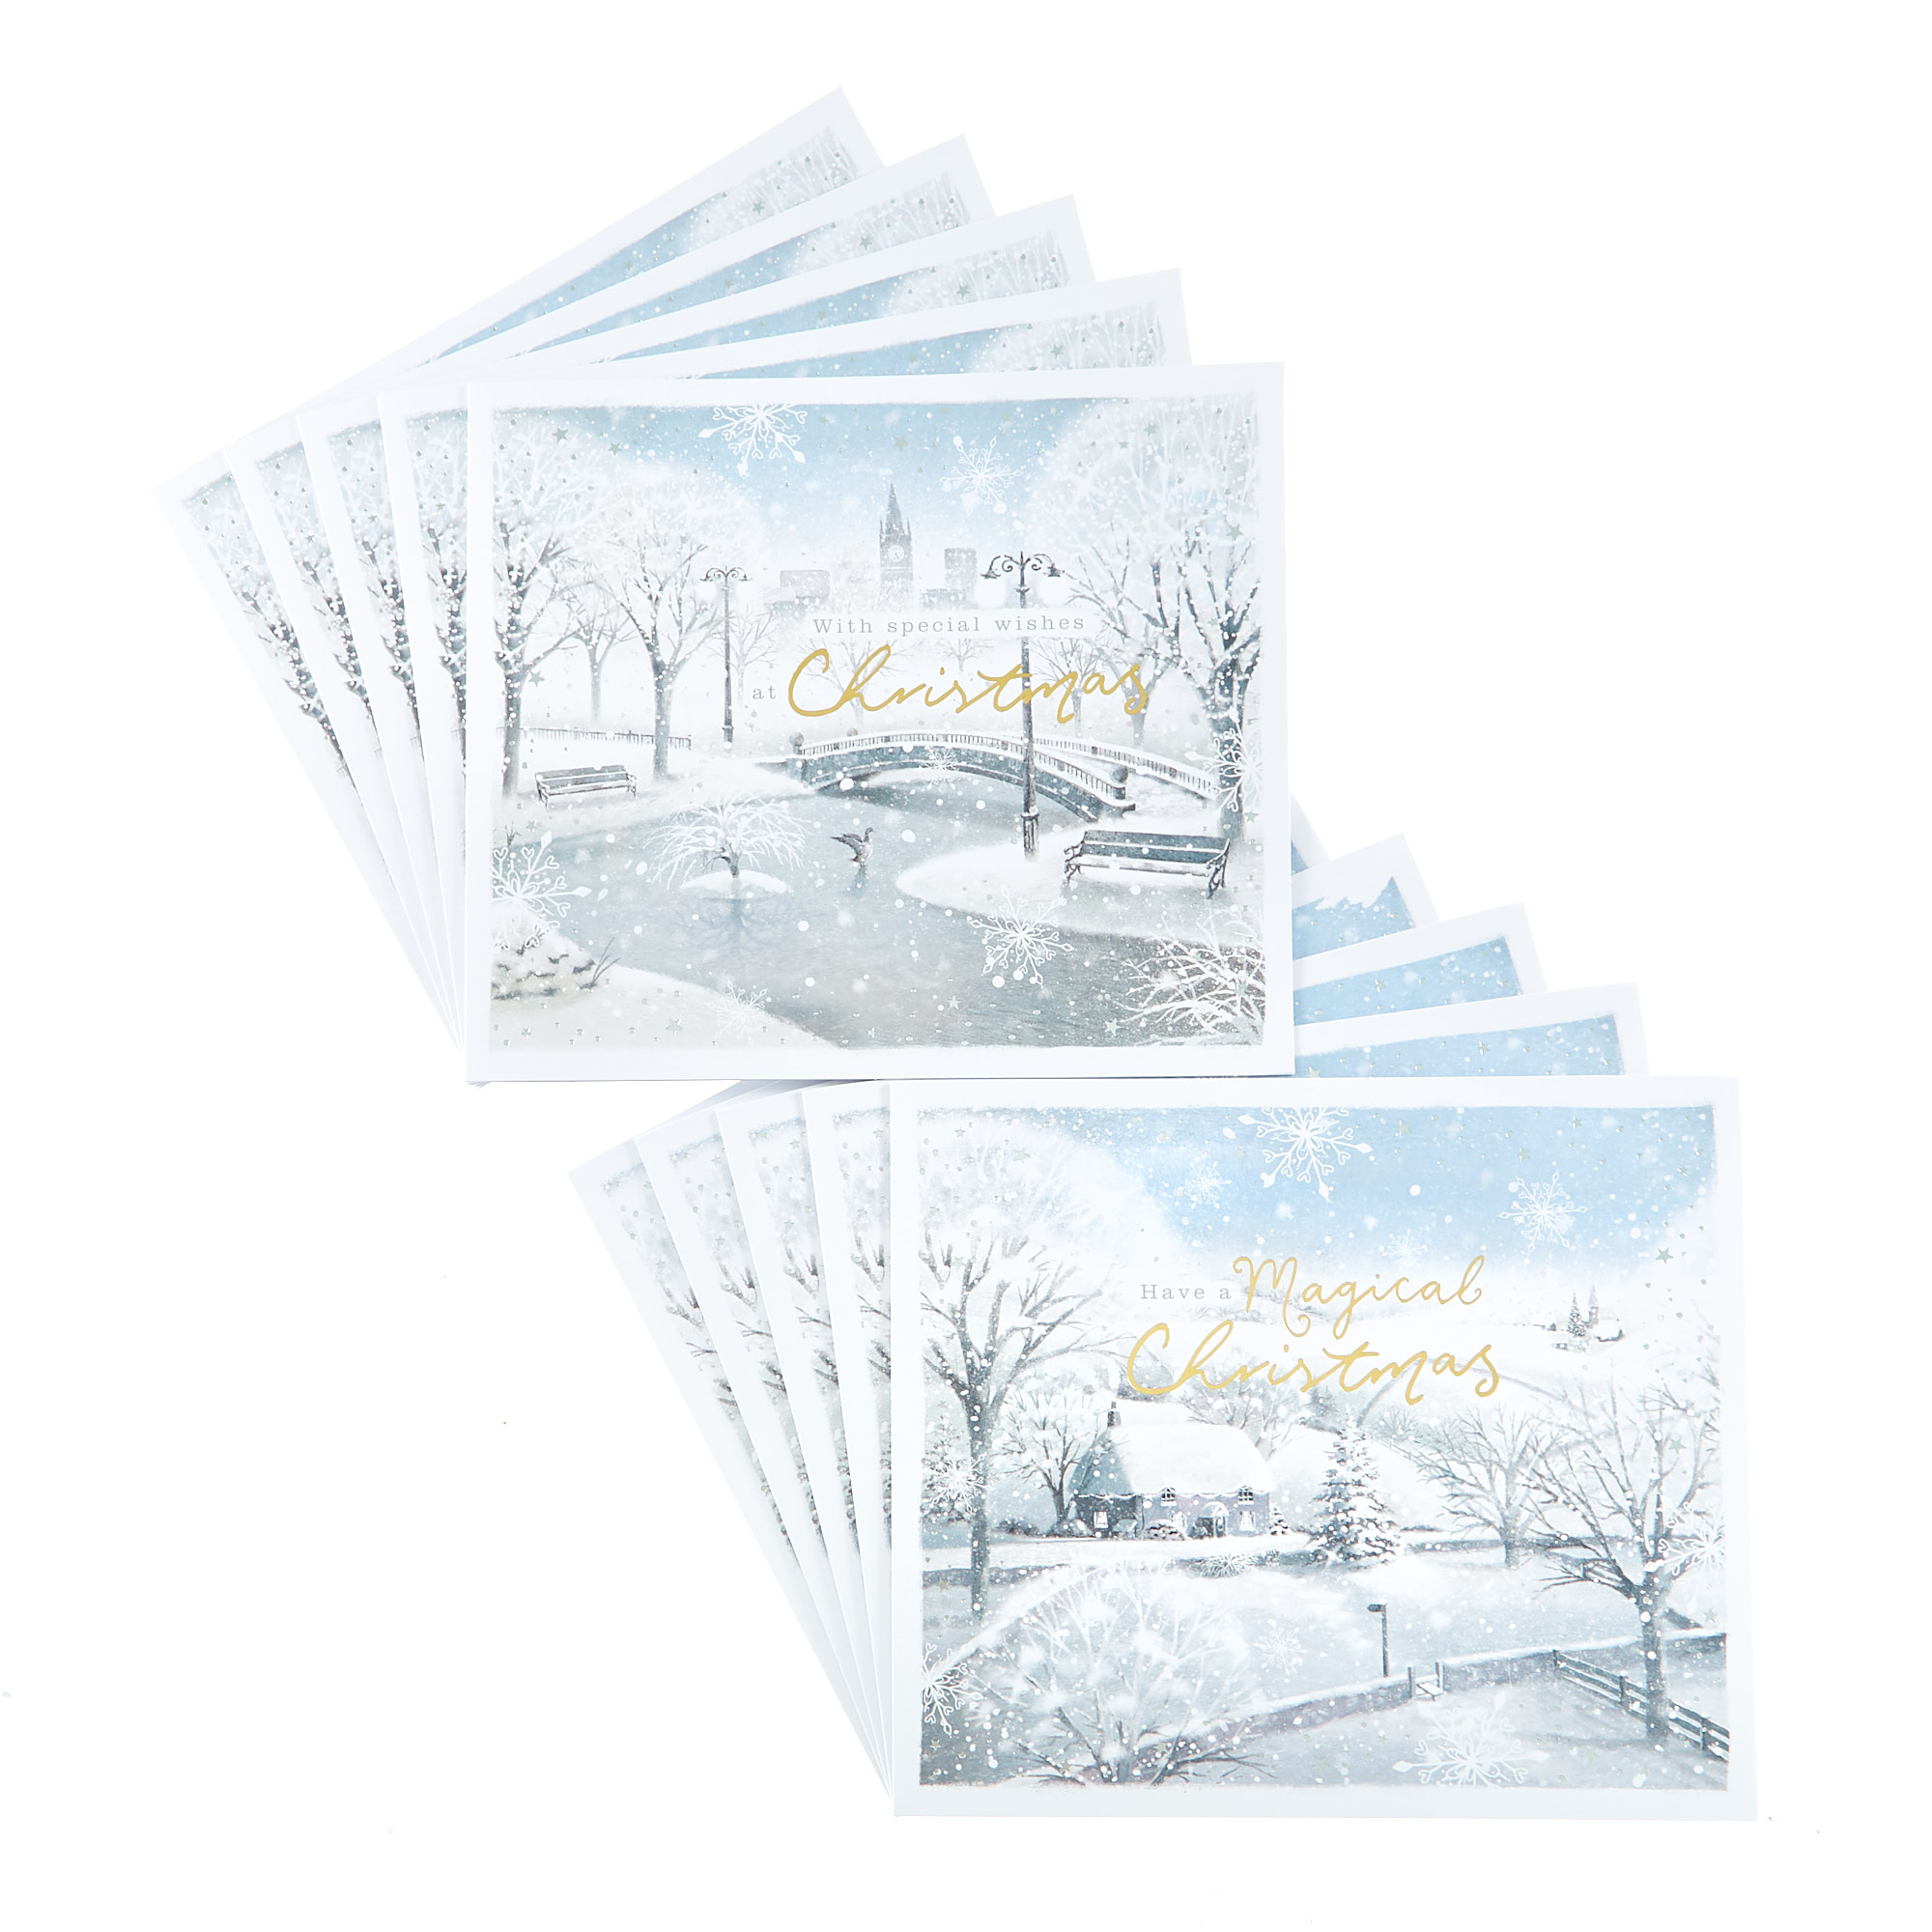 12 Deluxe Charity Boxed Christmas Cards - Magical Winter (2 Designs)